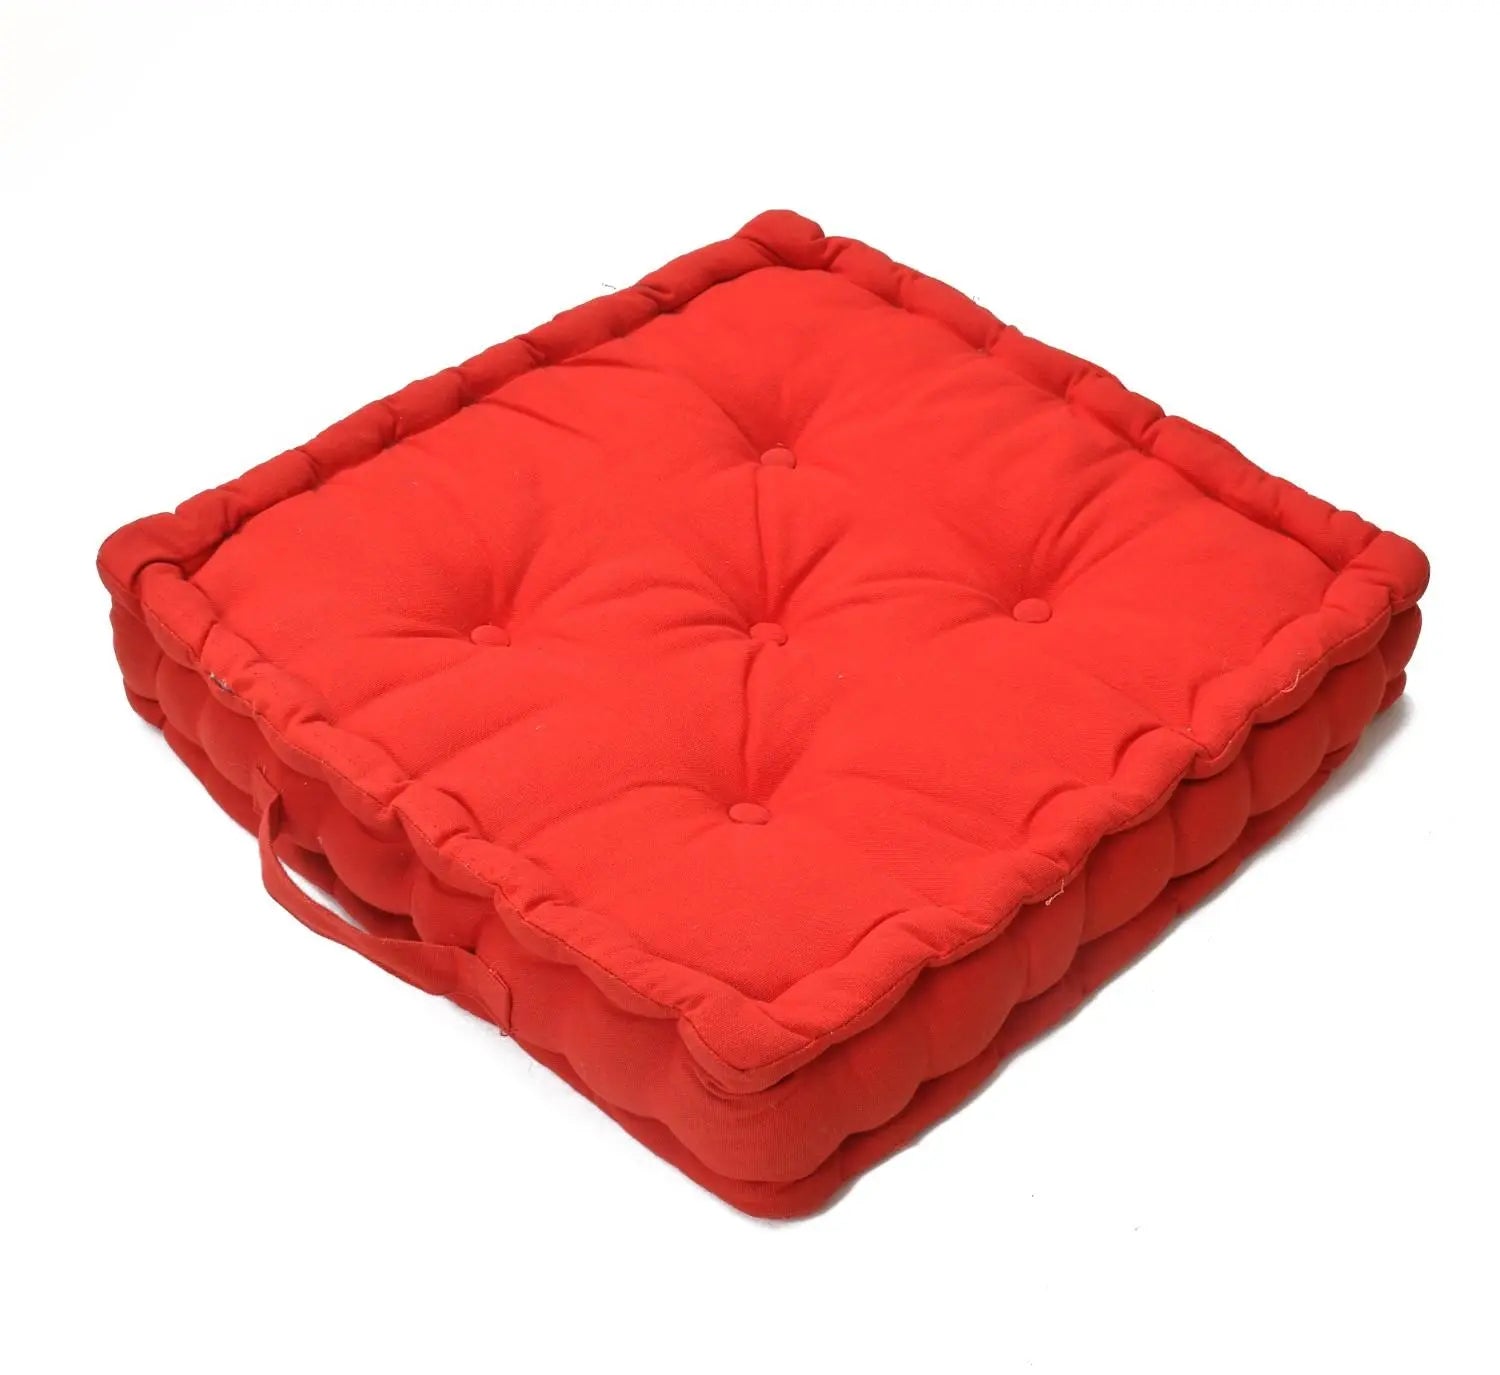 booster cushion red